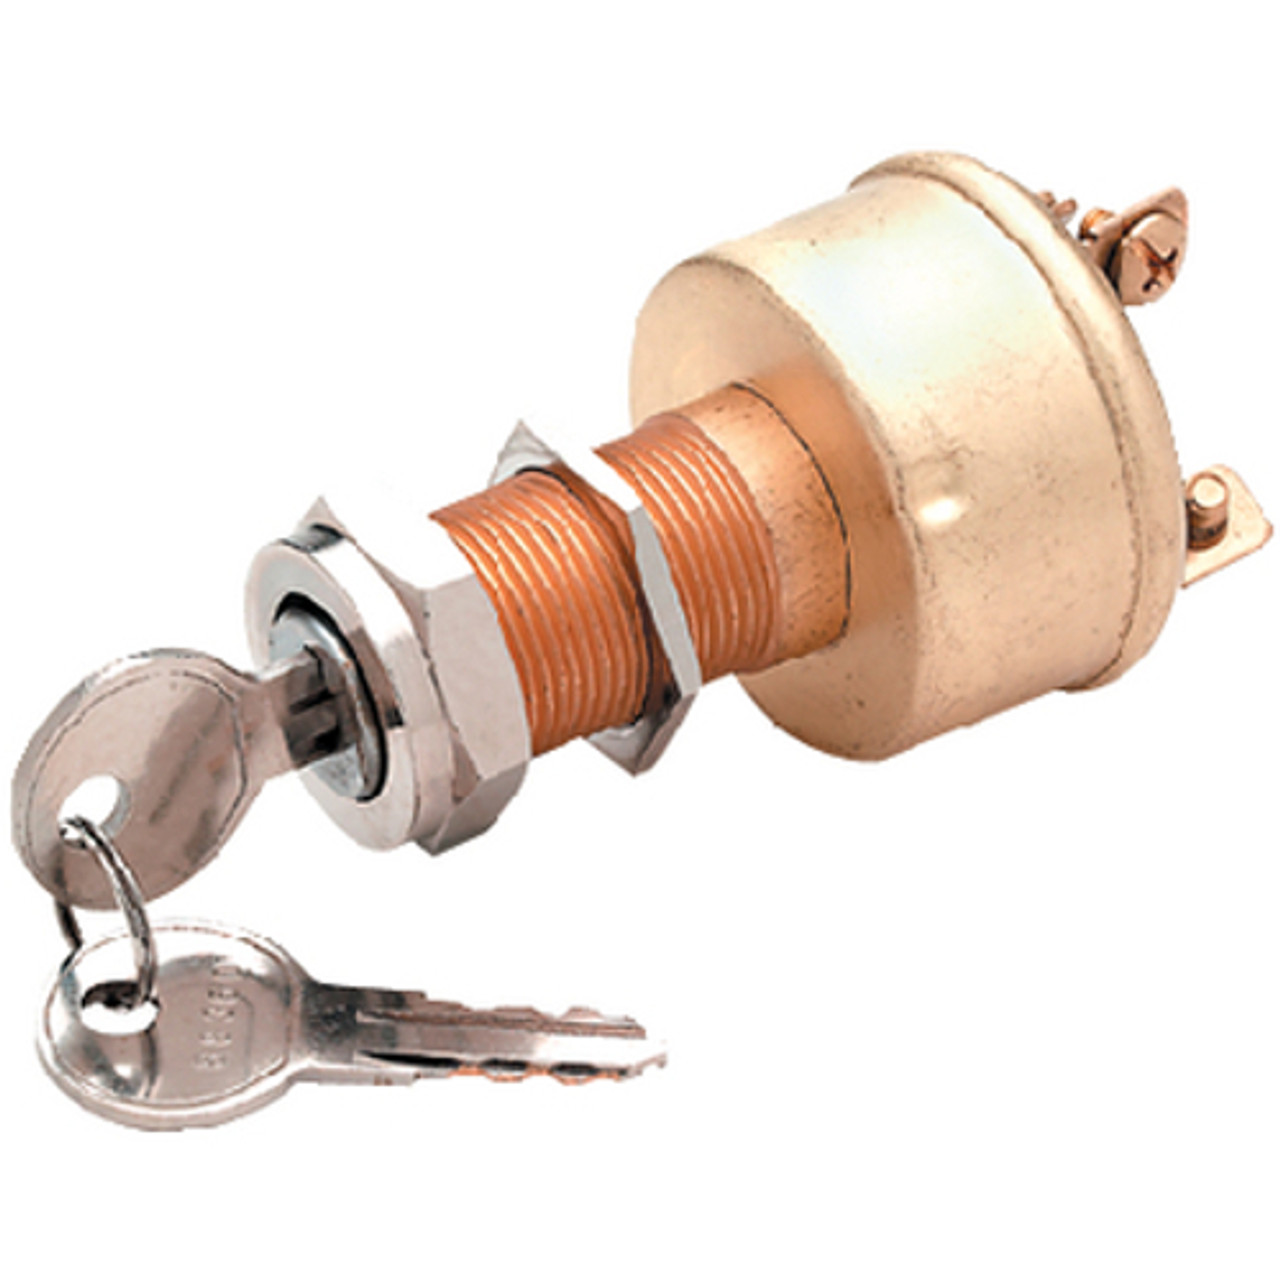 3 Position Heavy Duty 3 Terminal Brass Construction Ignition Switch for Boats